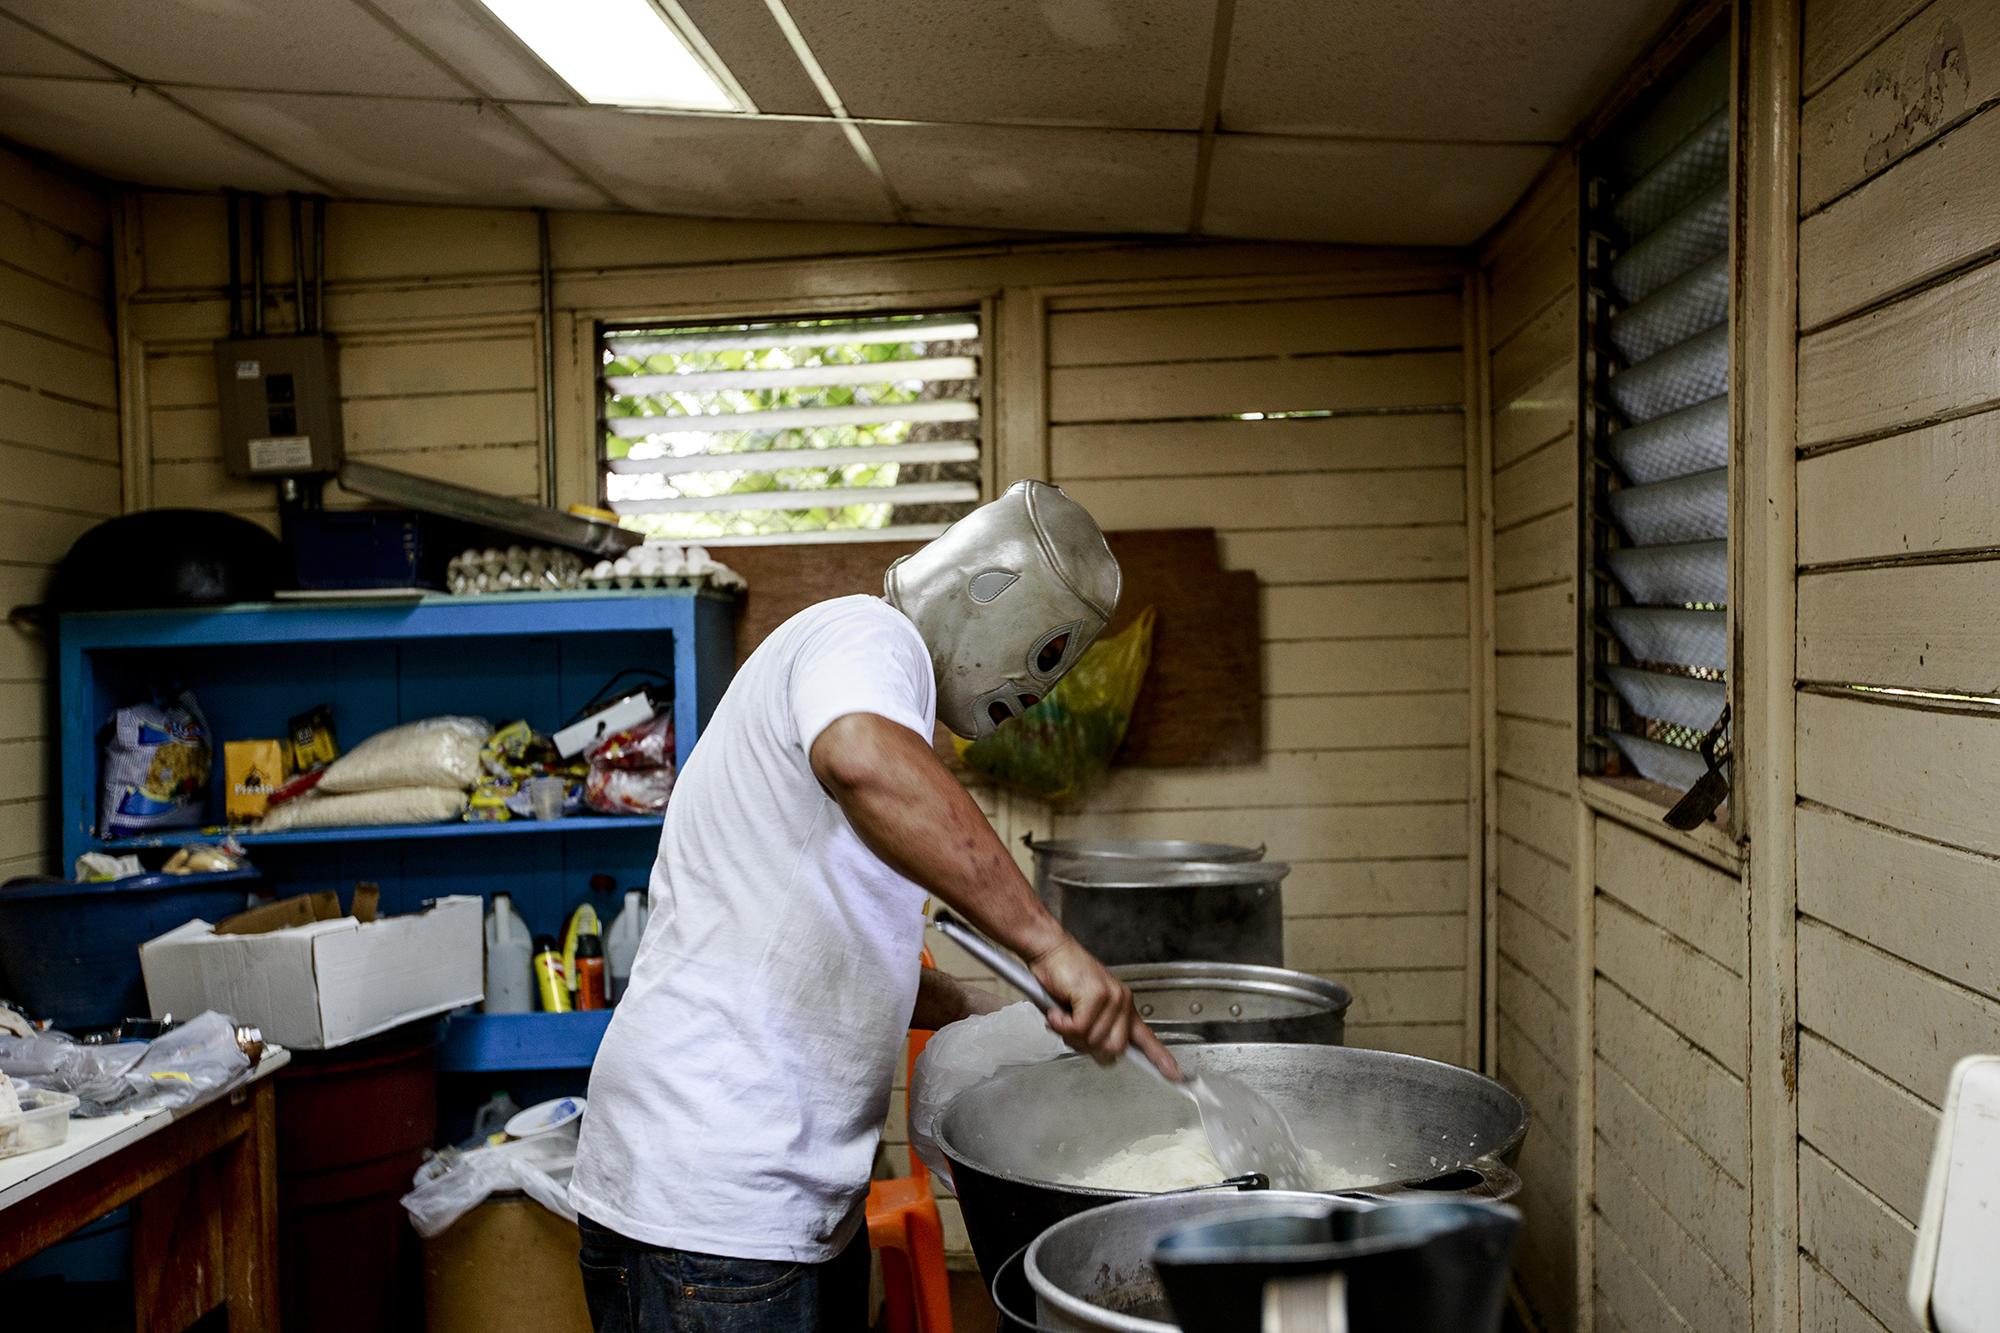 The cook in one of the wings of the UNAN protects his identity with the mask of El Santo, the legendary Mexican wrestler, as he prepares lunch for the students. The food is donated from Nicaraguans who come drop it off at the university. June 27, 2018.